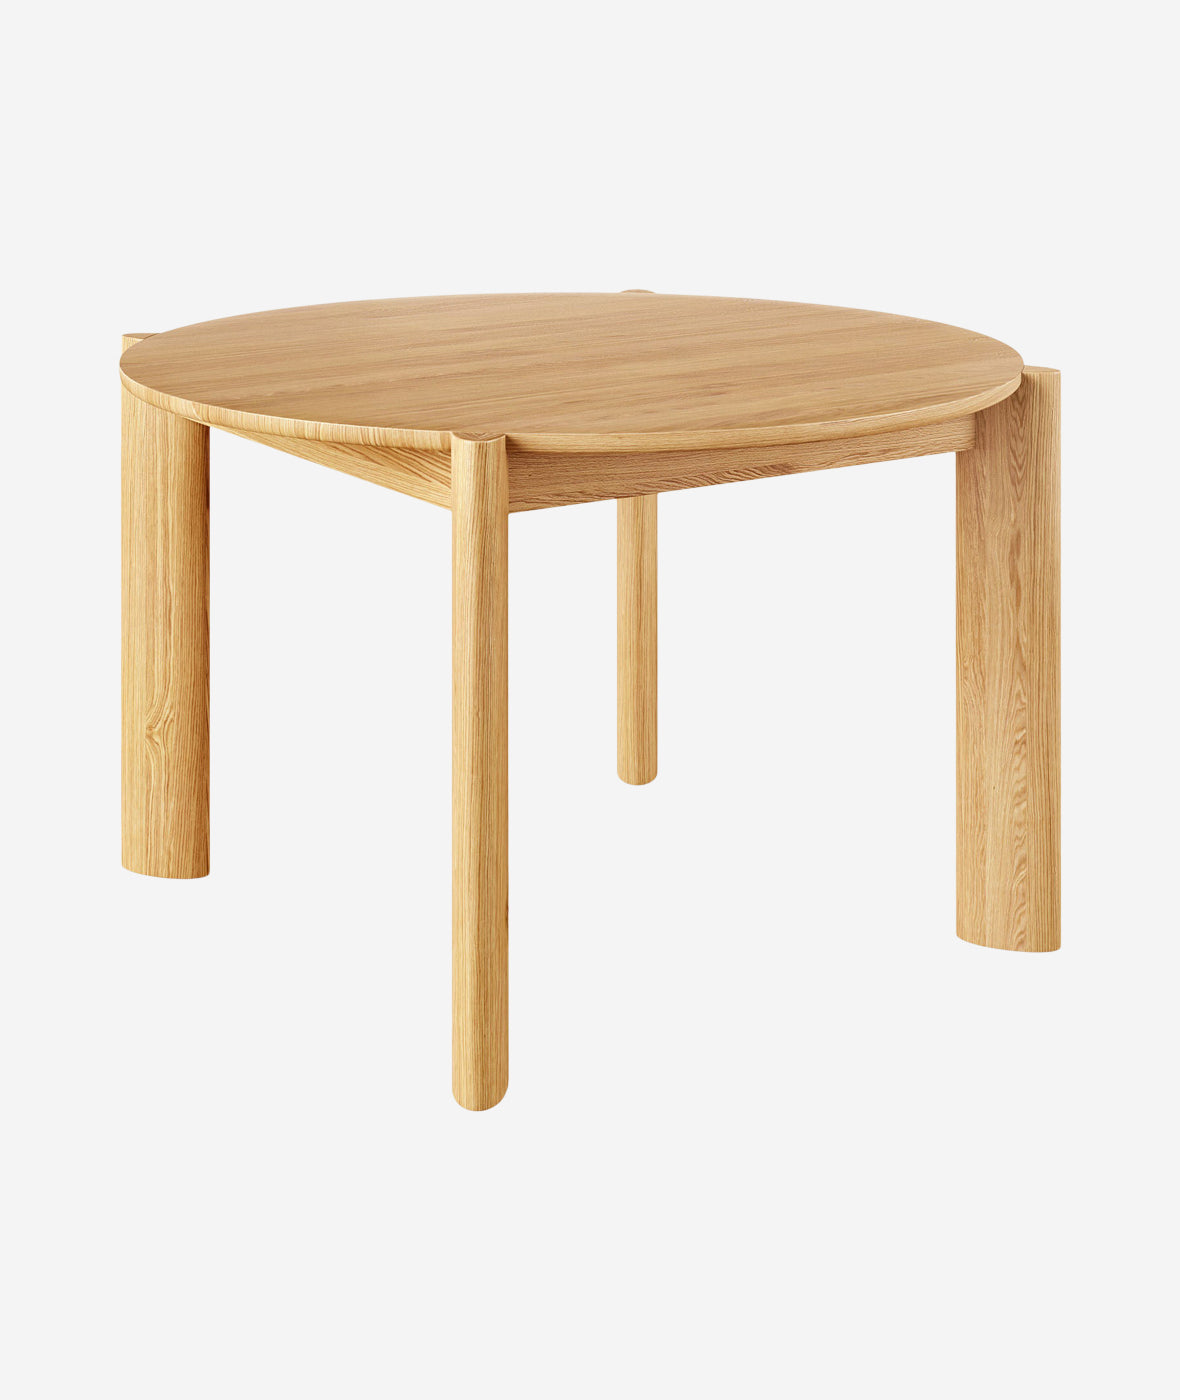 Bancroft Round Dining Table - More Options